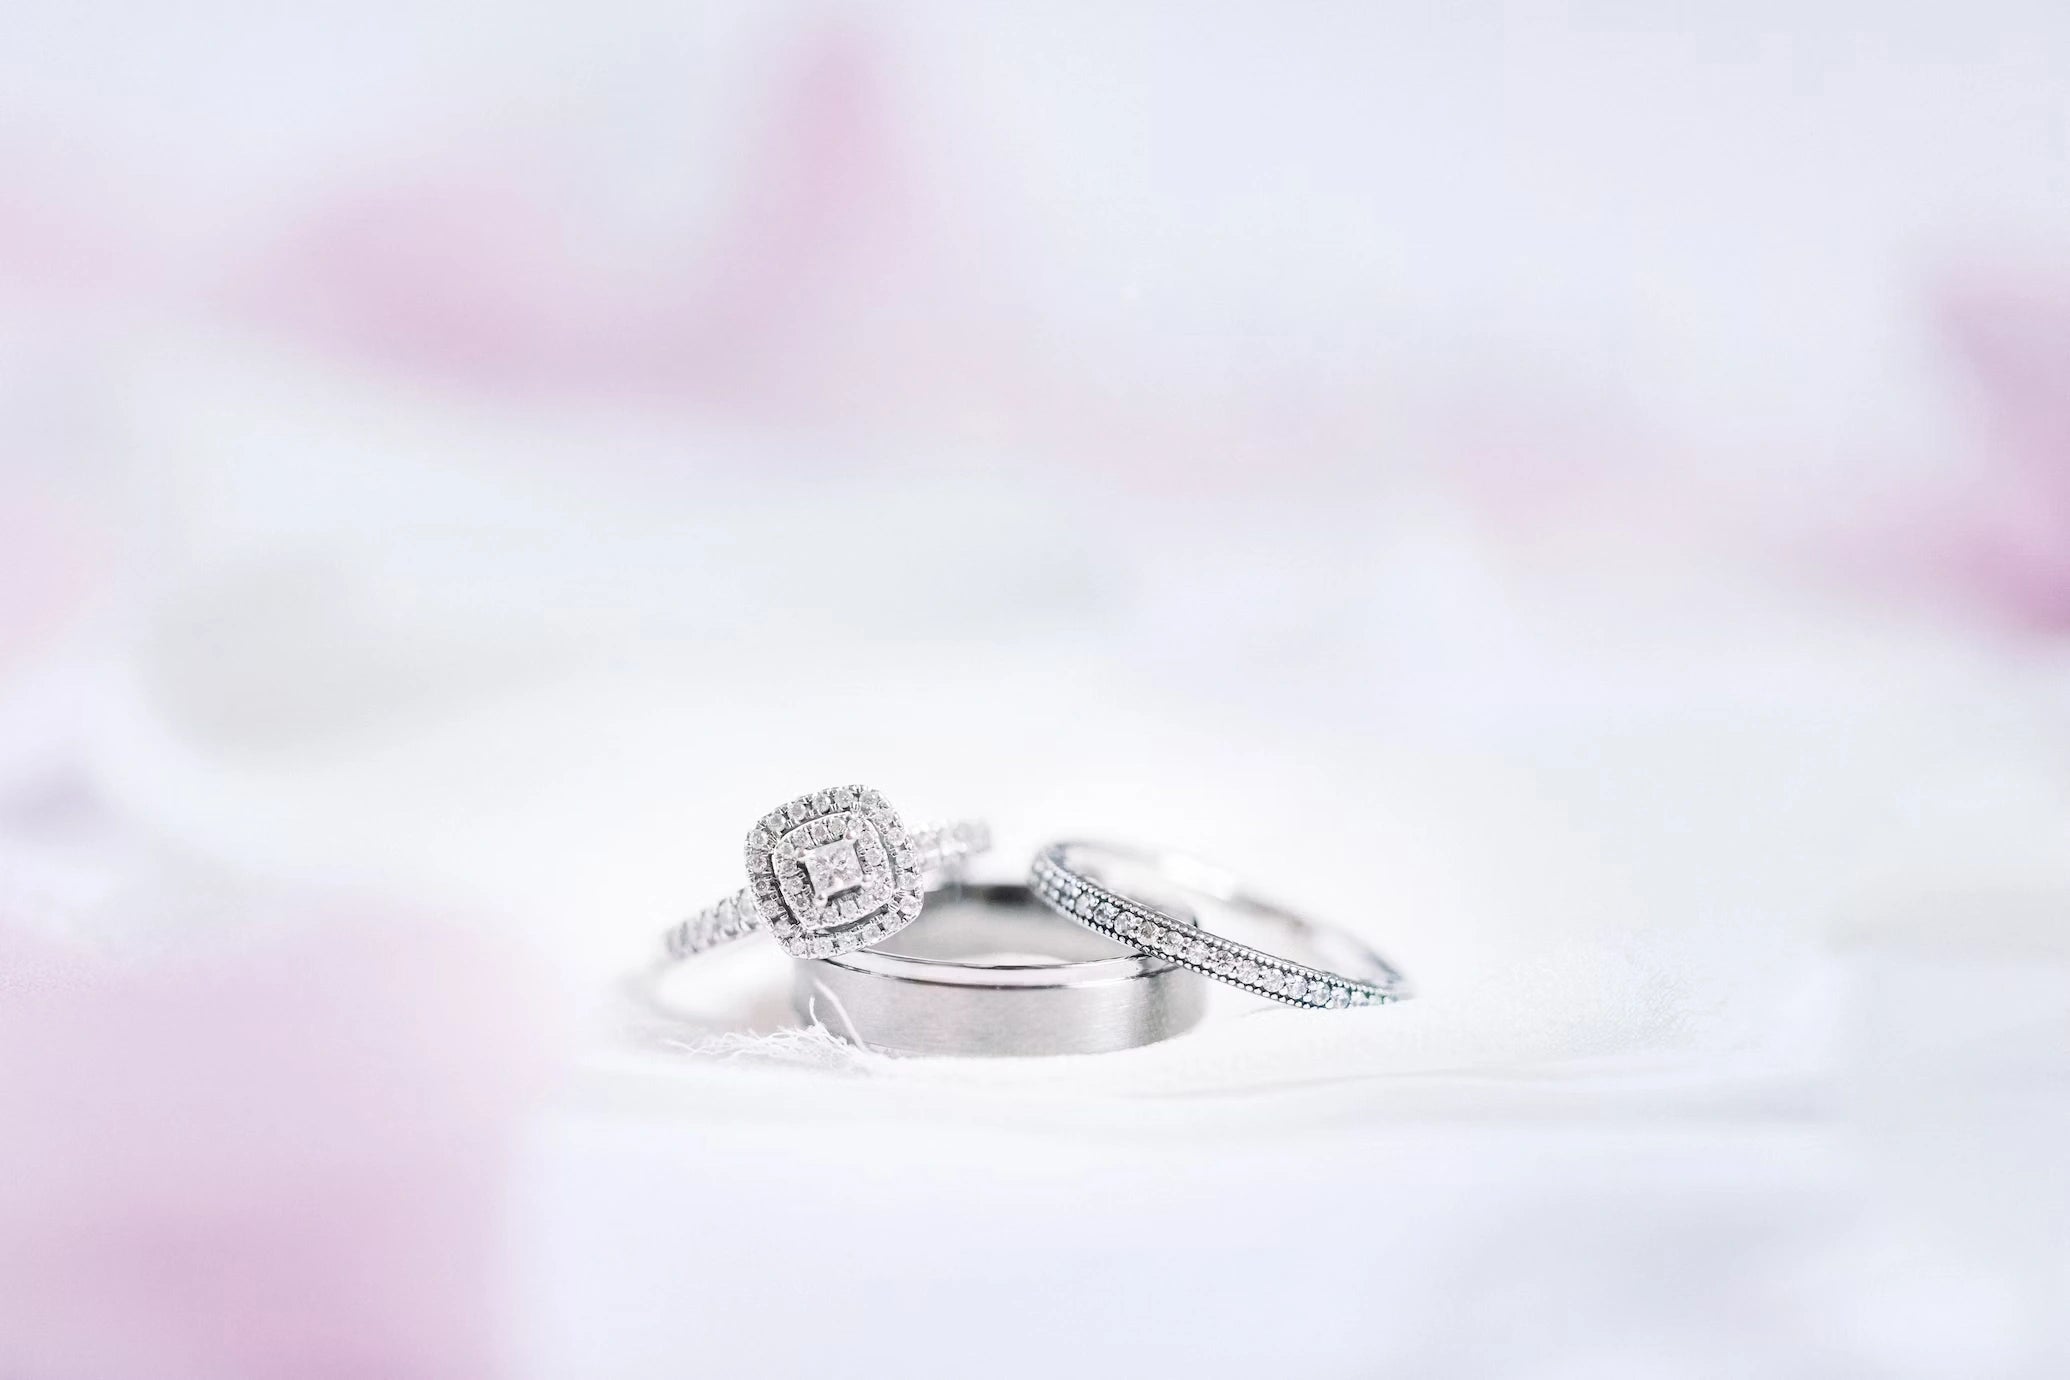 A diamond engagement rings with pinkish white background